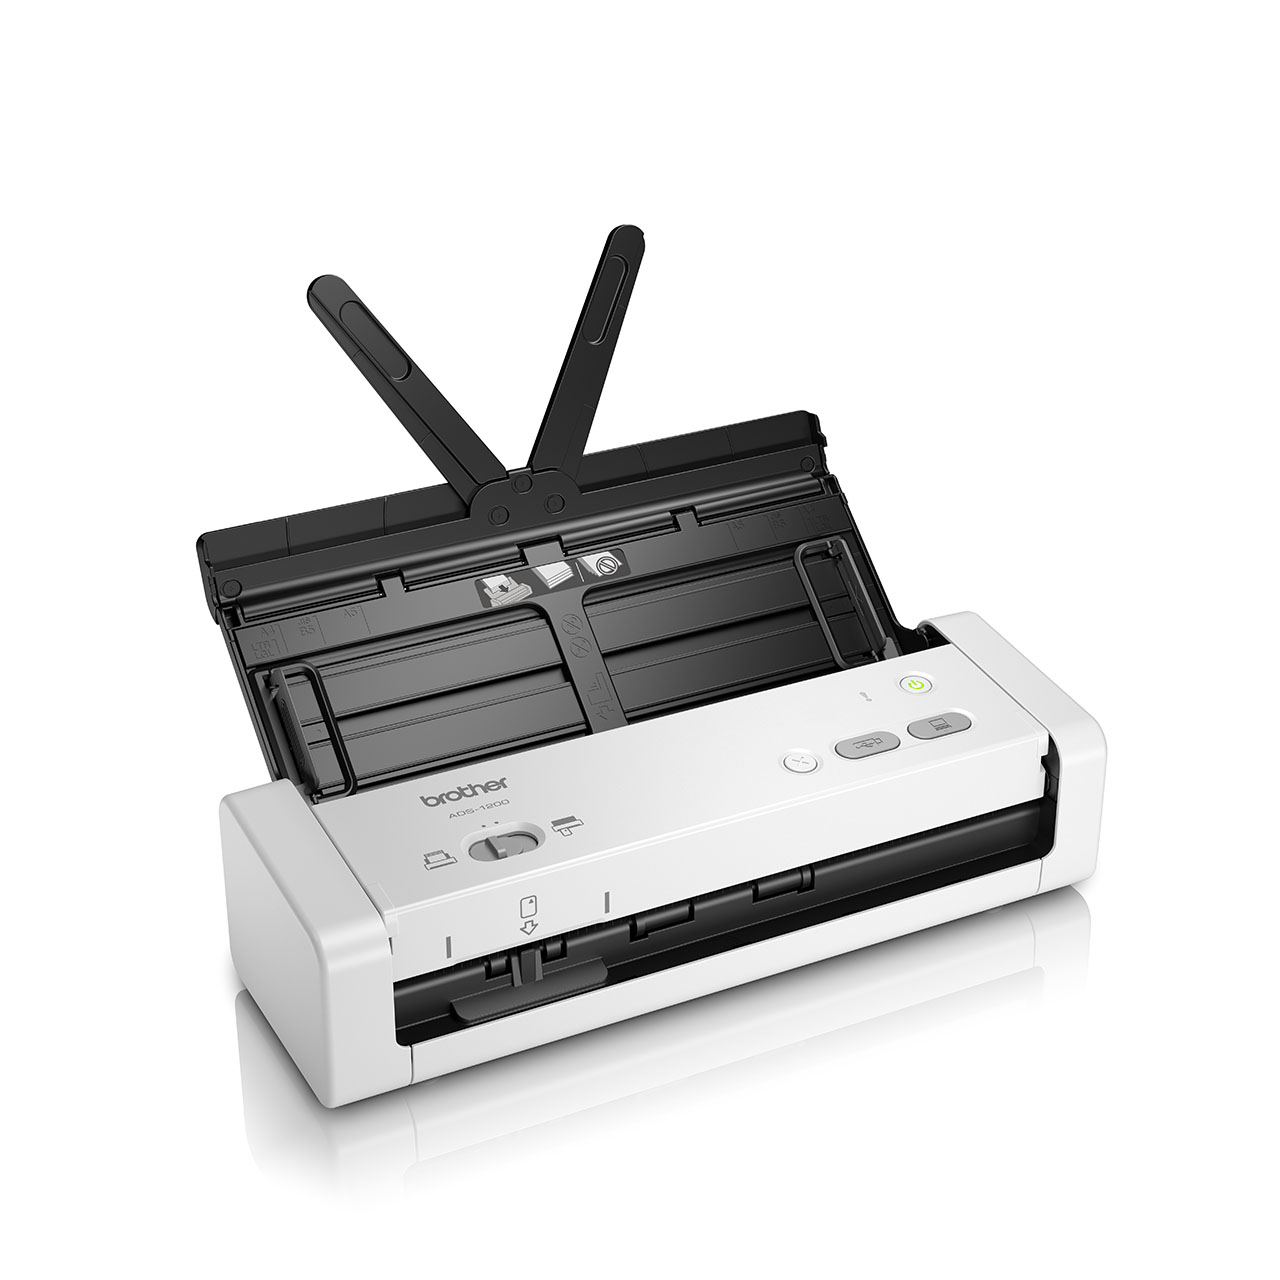 ADS-1200 Portable Document Scanner